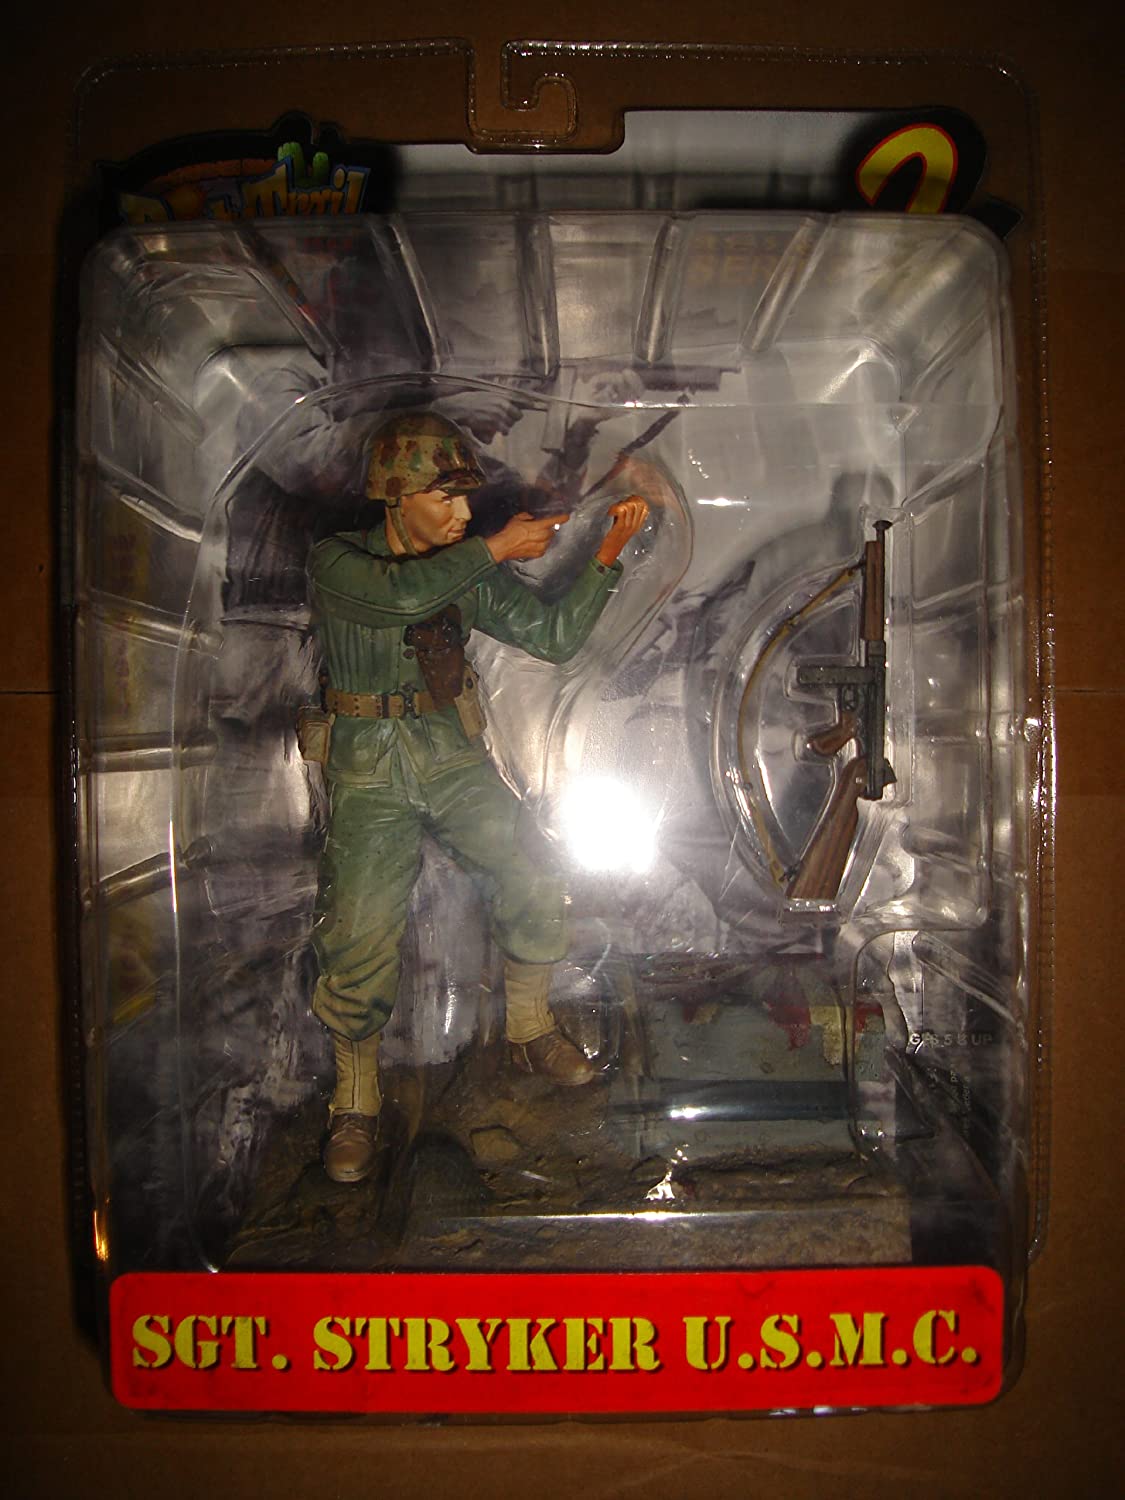 Dusty Trail Toys Series 2 Sergeant Stryker USMC WWII Pacific Theater Action Figure